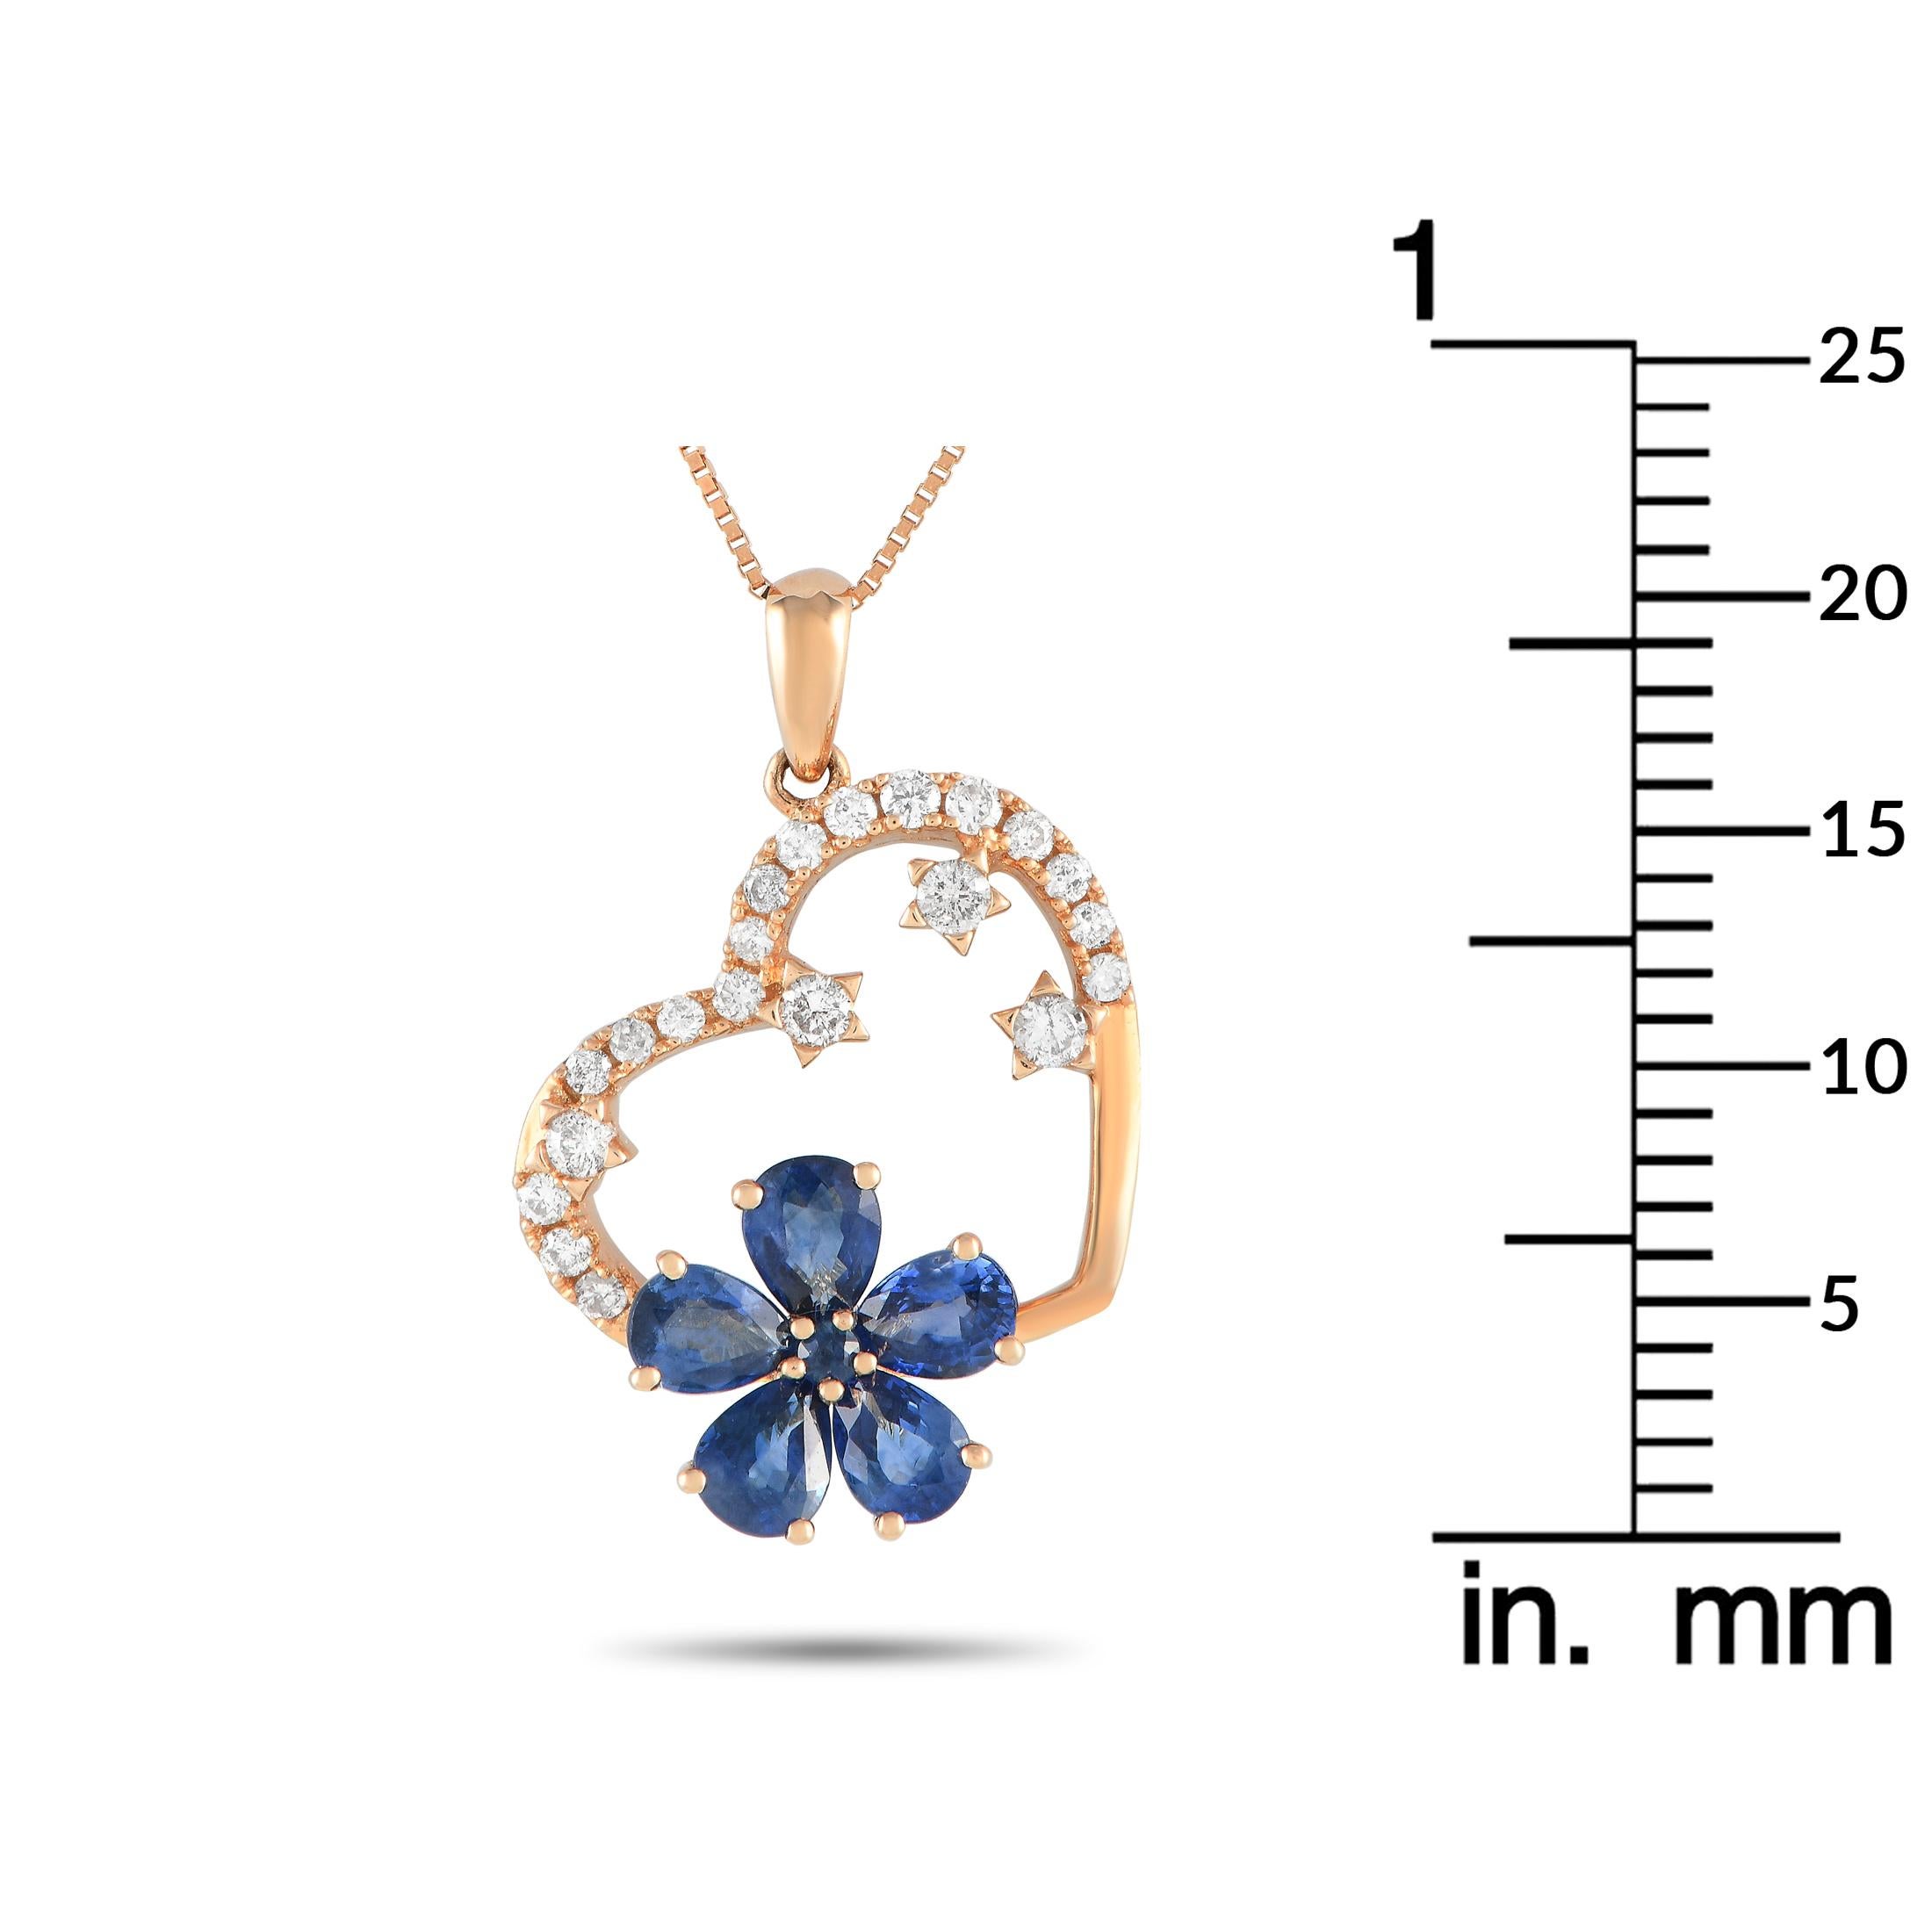 LB Exclusive 14K Rose Gold 0.20ct Diamond Pendant Necklace PH4-10098RSA In New Condition For Sale In Southampton, PA